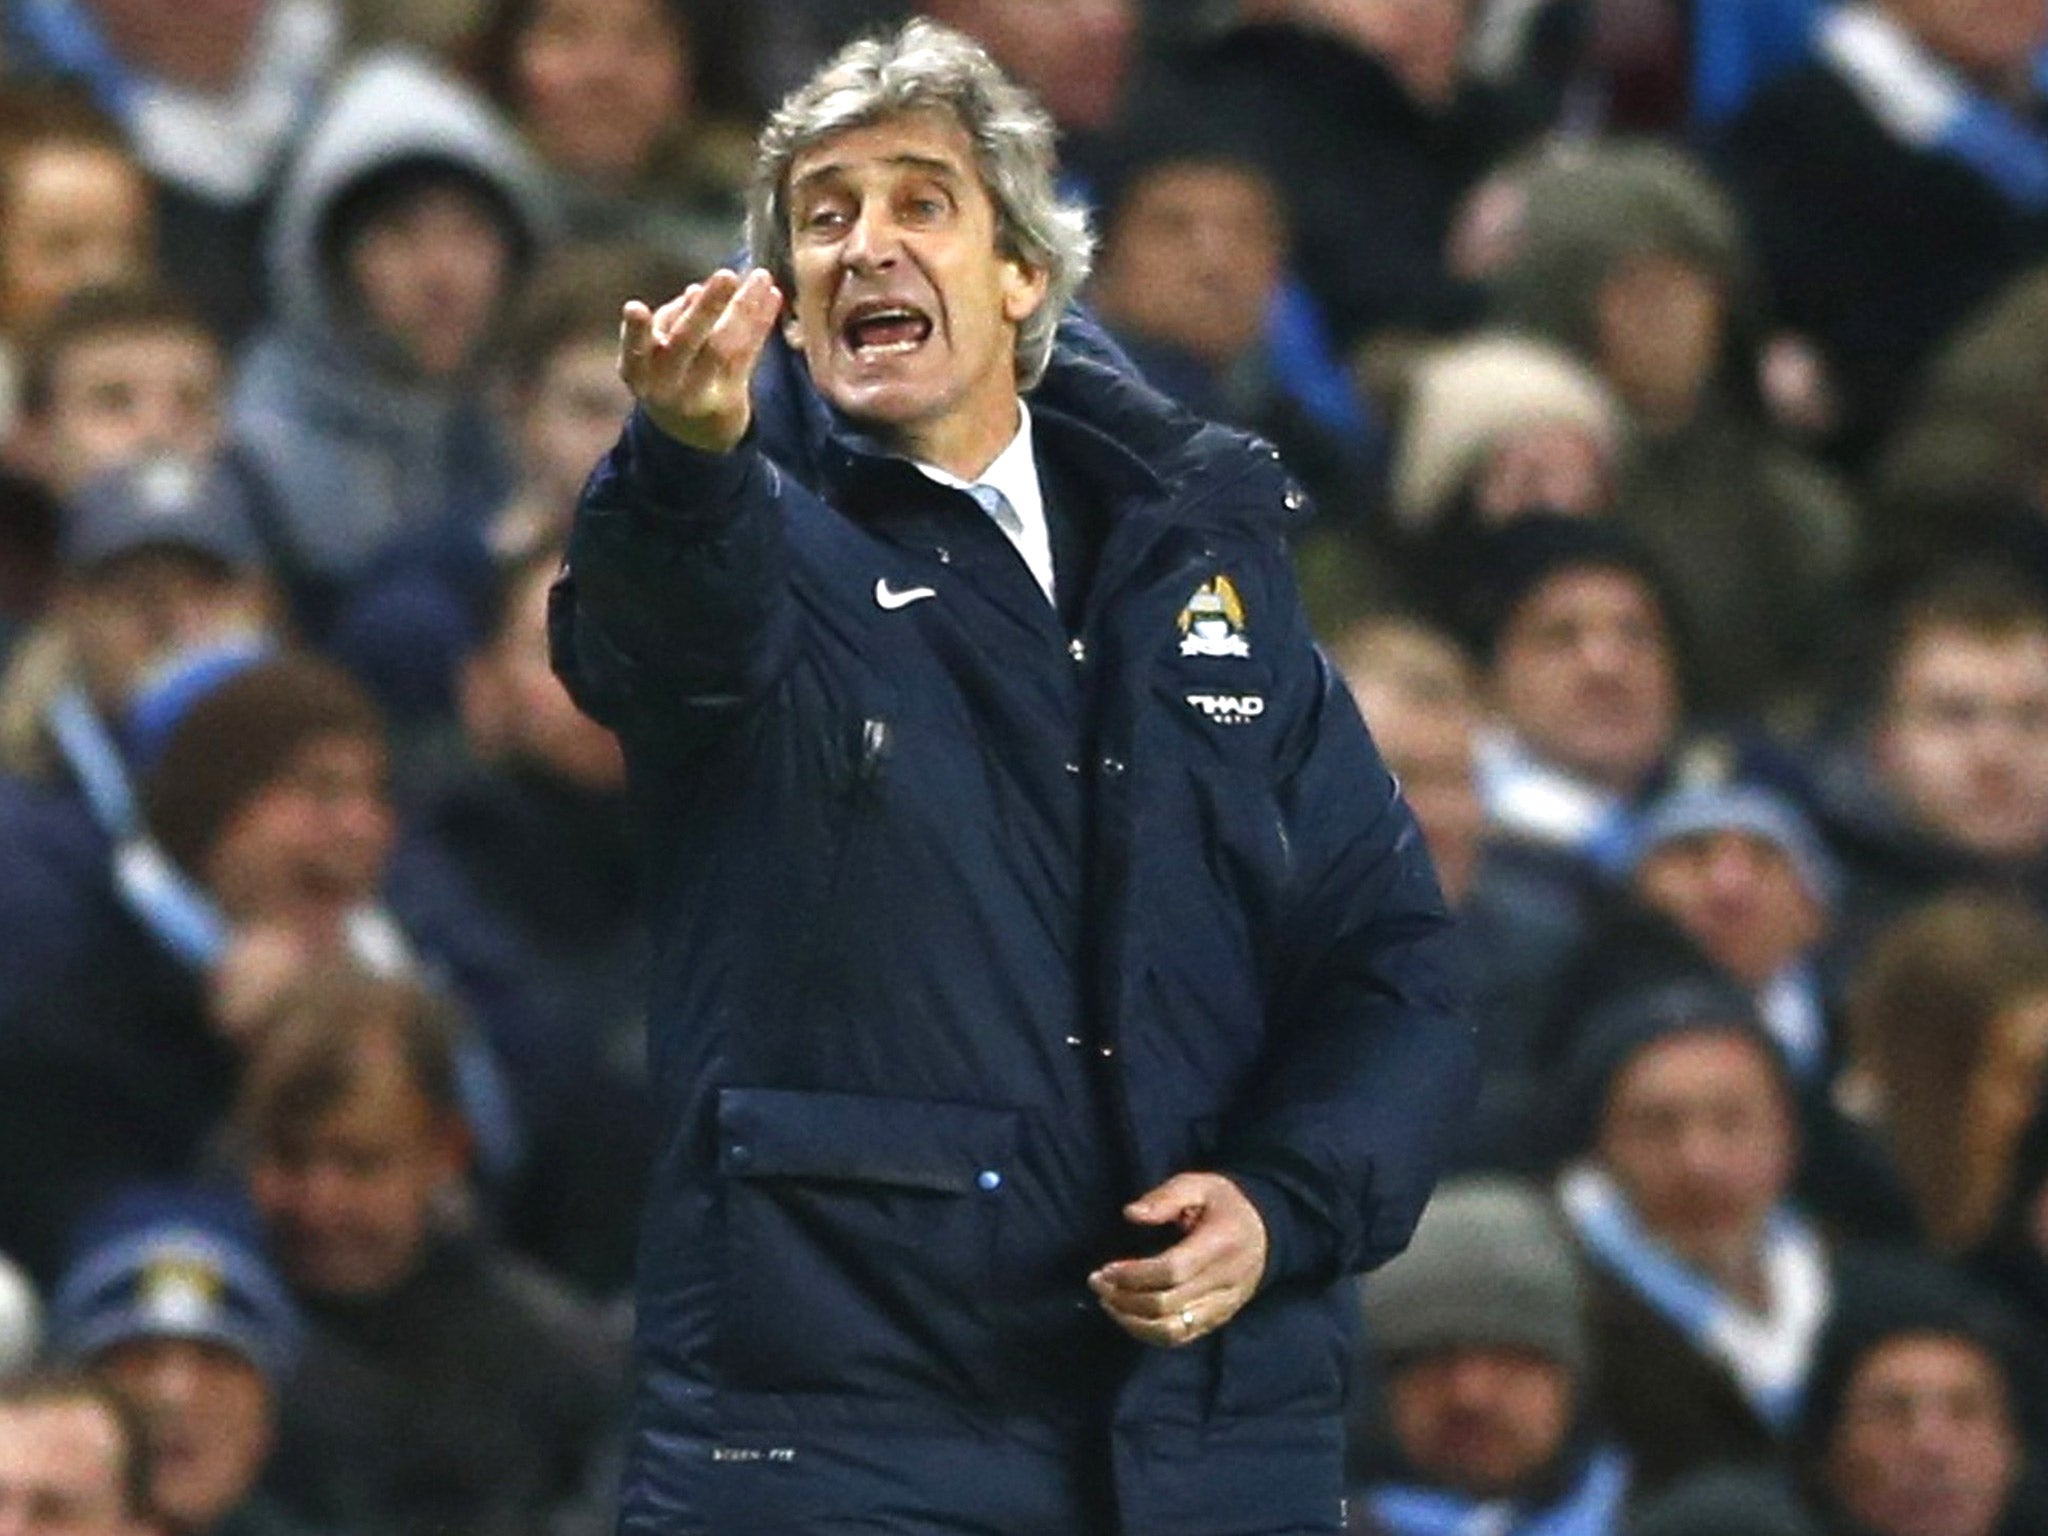 Manuel Pellegrini wants his team to play with a free spirit